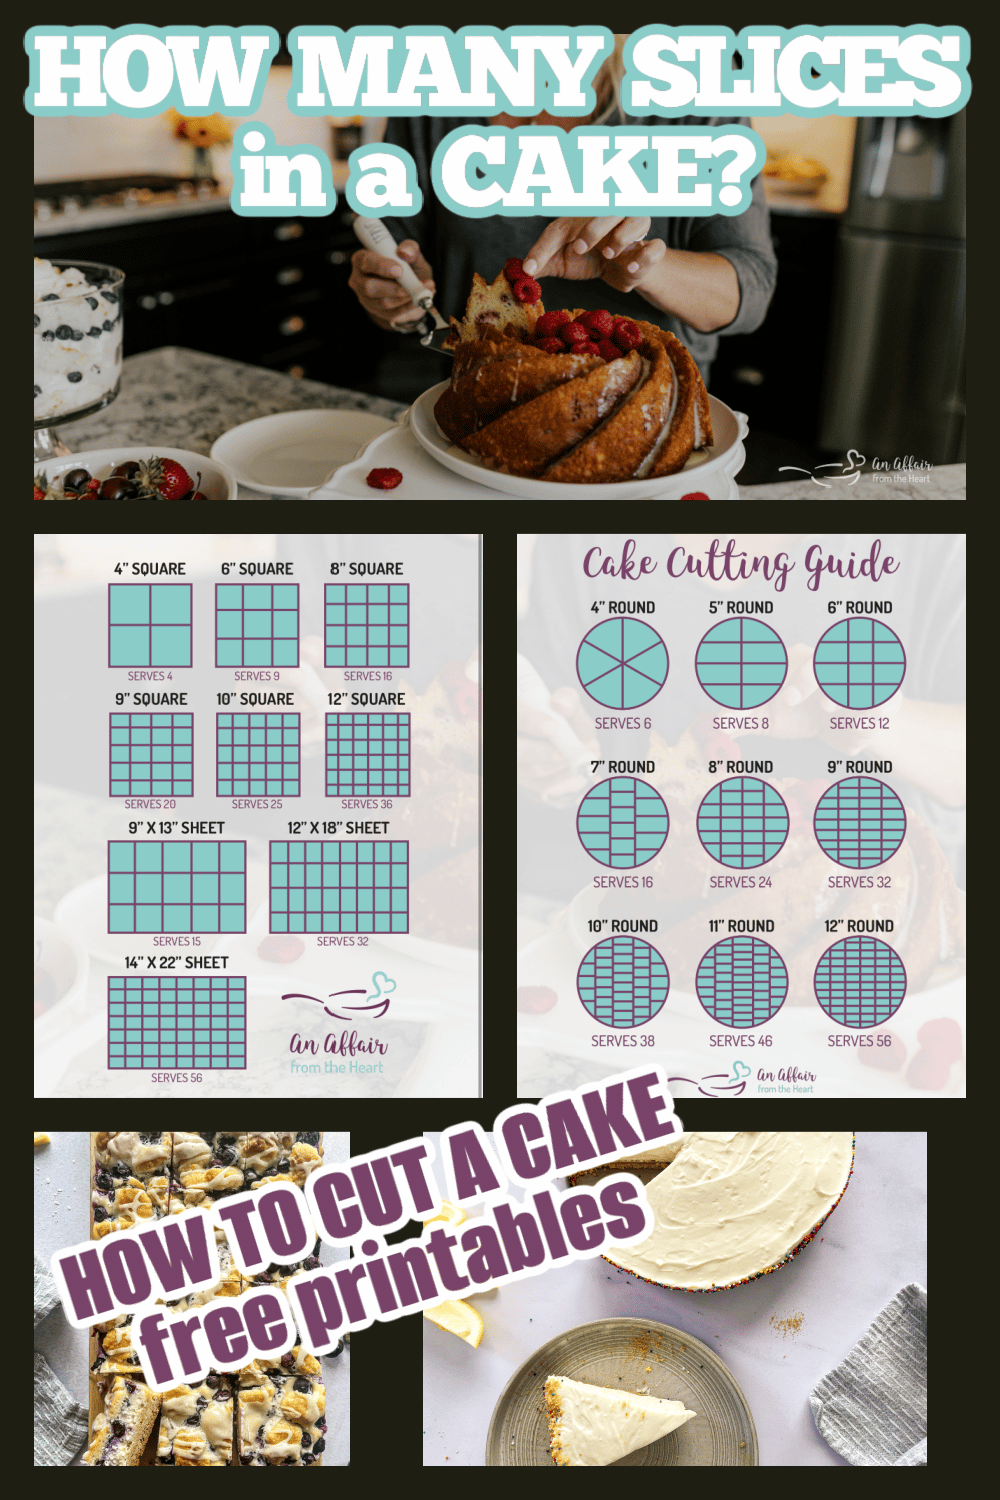 How Many Slices Will You Get From a Cake?